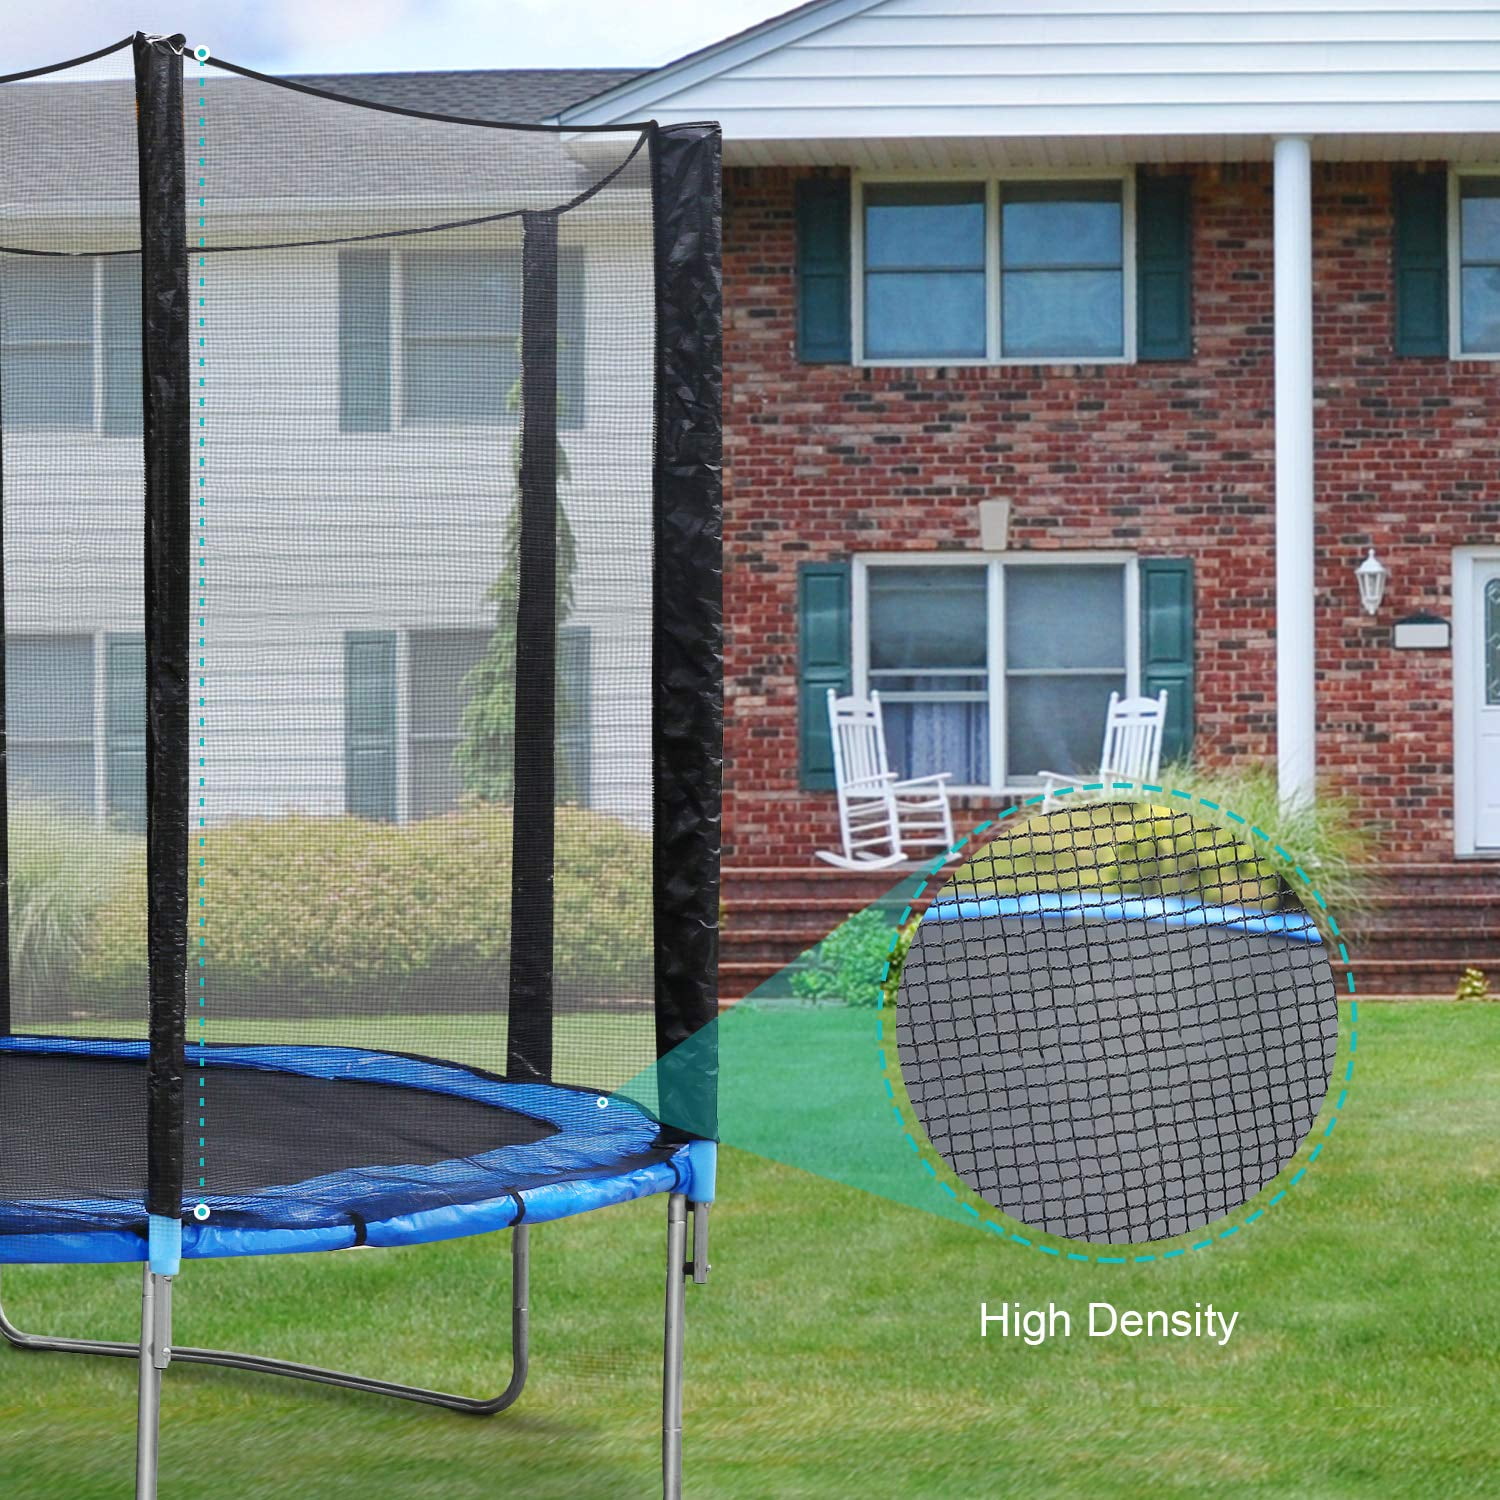 14 FT Trampoline for Kids Adults Max Weight 450 LBS with Recreation Trampoline Ladder & Enclosure Safety Net Provide Bounce Backyards Outdoor - 1